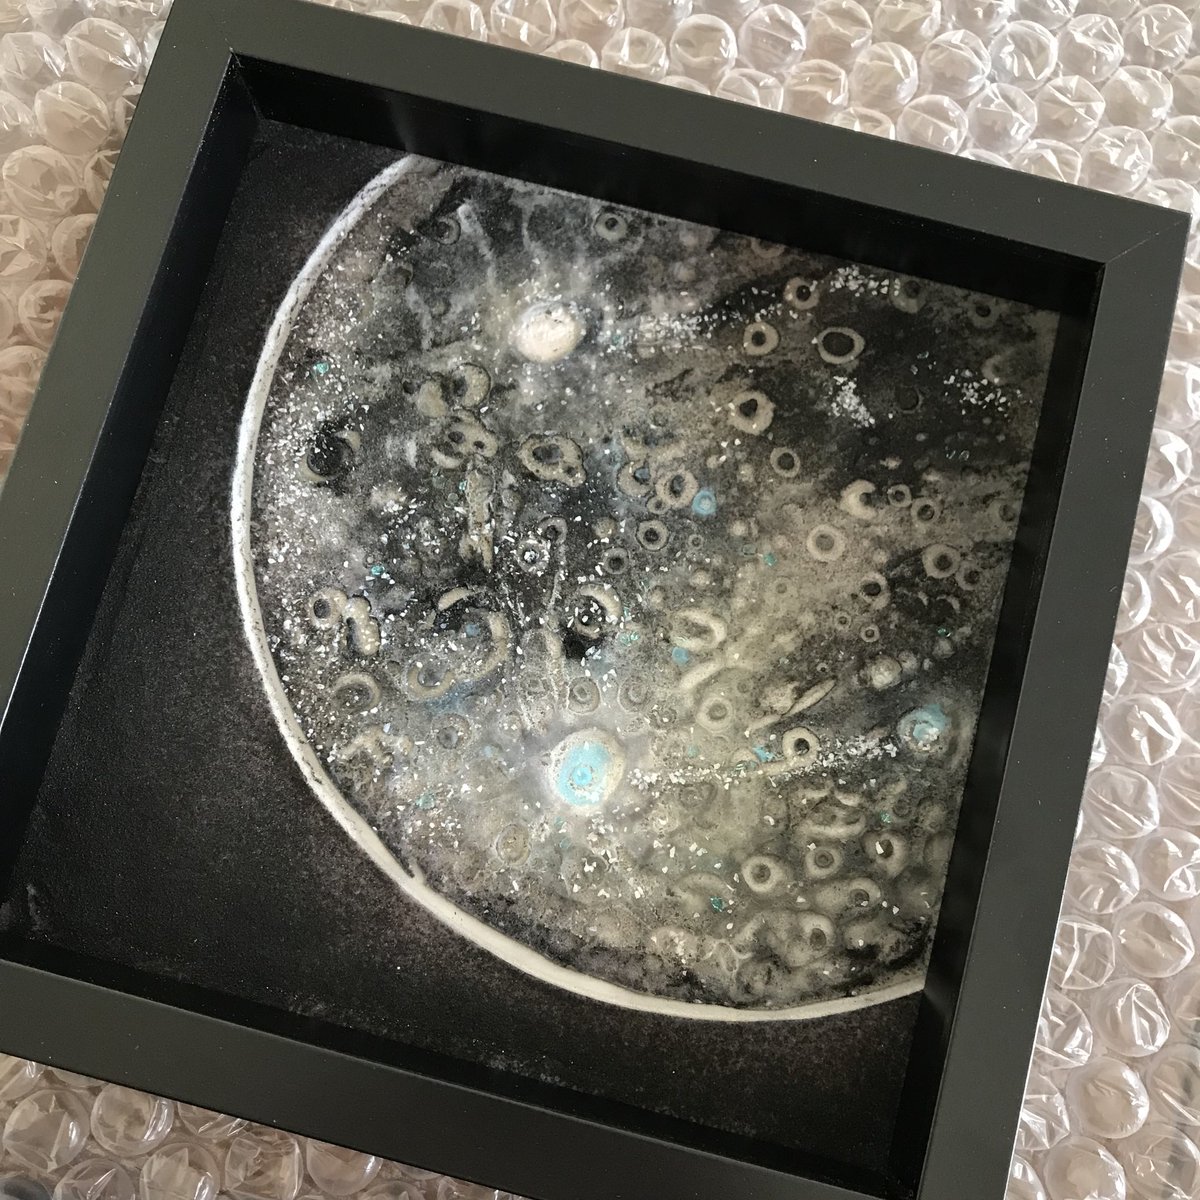 The Moon is off to a new home! I will be working on more of the solar system in glass powder for the #Contemporaryglasssociety SE exhibition in September.  #glassart #buyglassart #presentideas #fusedglassart